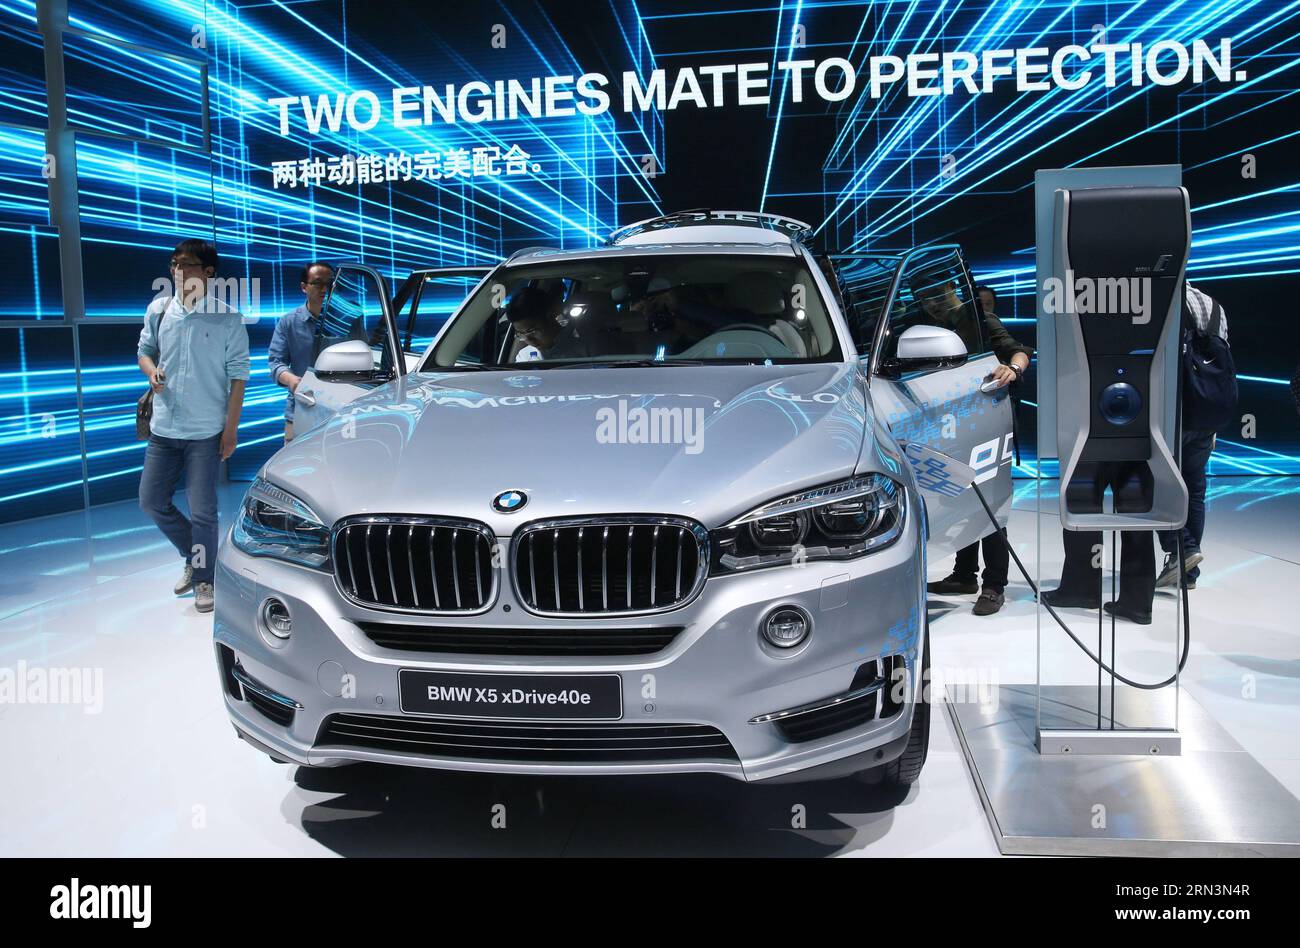 (150422) -- SHANGHAI, April 22, 2015 -- A BMW X5 xDrive40e hybrid car is displayed at 2015 Shanghai International Automobile Industry Exhibition in Shanghai, China, April 22, 2015. A total of 1,343 complete vehicles were displayed, including 103 domestic and international new energy vehicles and 47 concept cars. ) (zhs) CHINA-SHANGHAI-AUTO SHOW (CN) PeixXin PUBLICATIONxNOTxINxCHN   Shanghai April 22 2015 a BMW X5  Hybrid Car IS displayed AT 2015 Shanghai International Automobiles Industry Exhibition in Shanghai China April 22 2015 a total of 1 343 Complete VEHICLES Were displayed including 103 Stock Photo